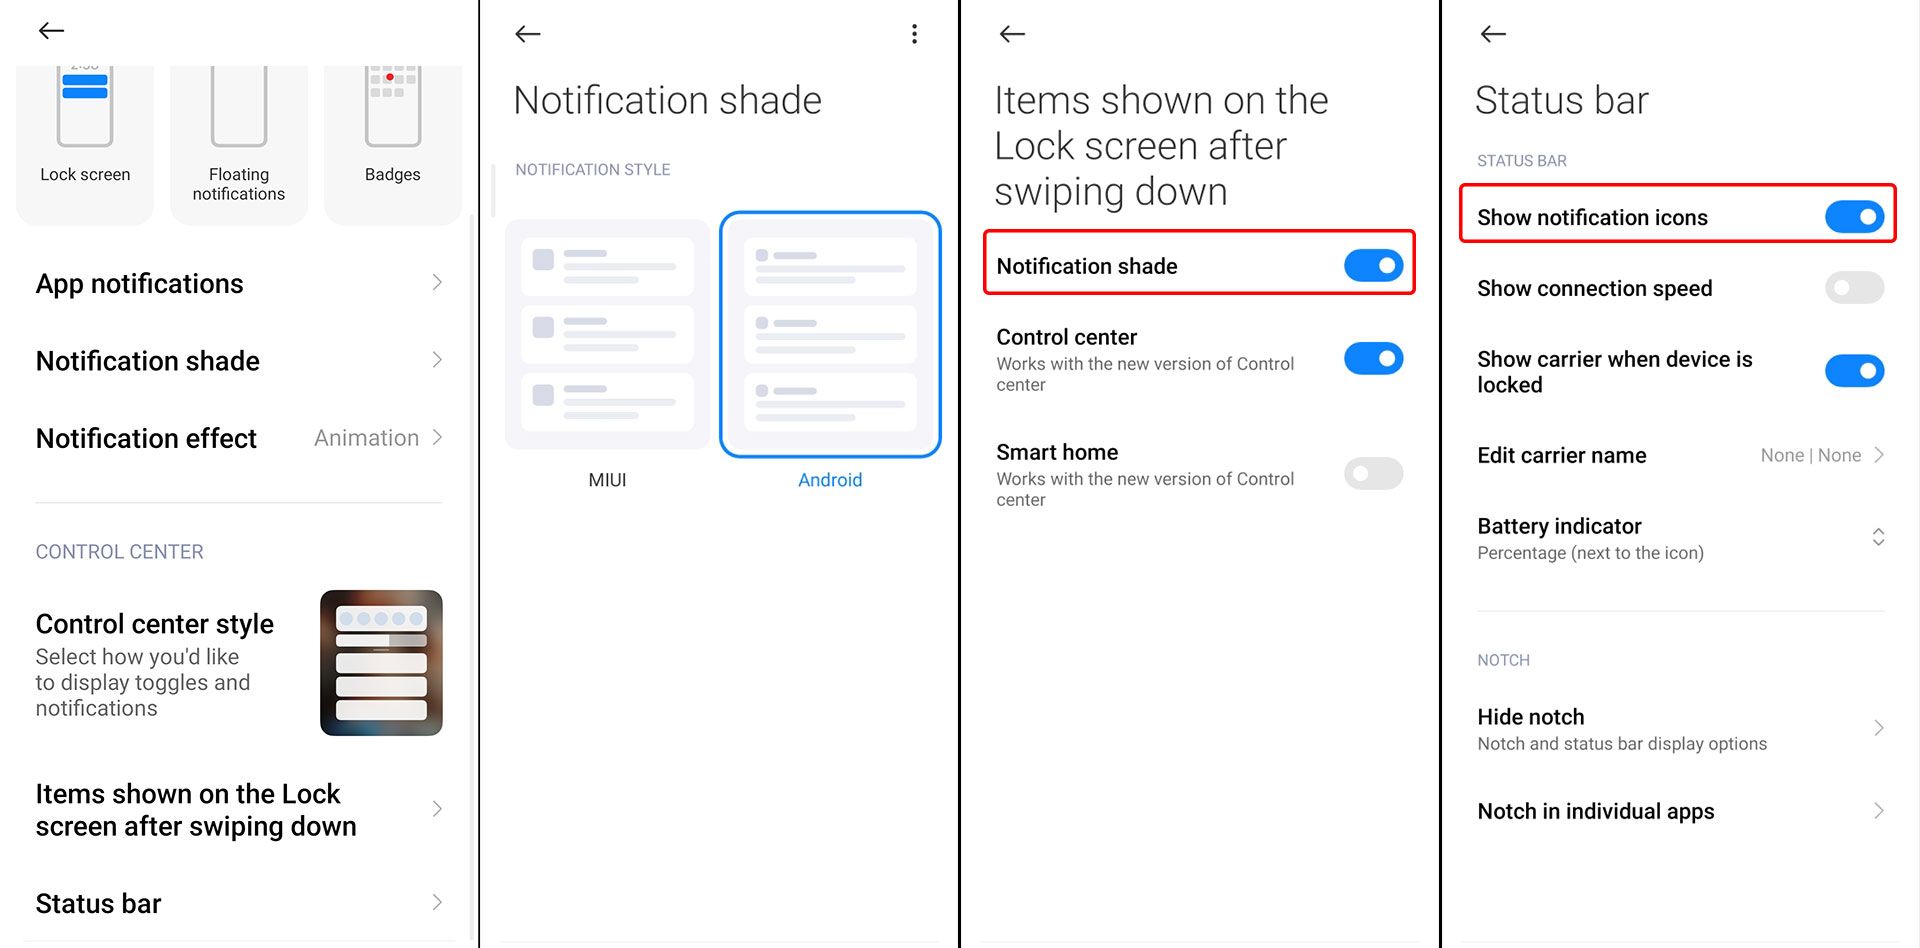 Other notification settings in MIUI